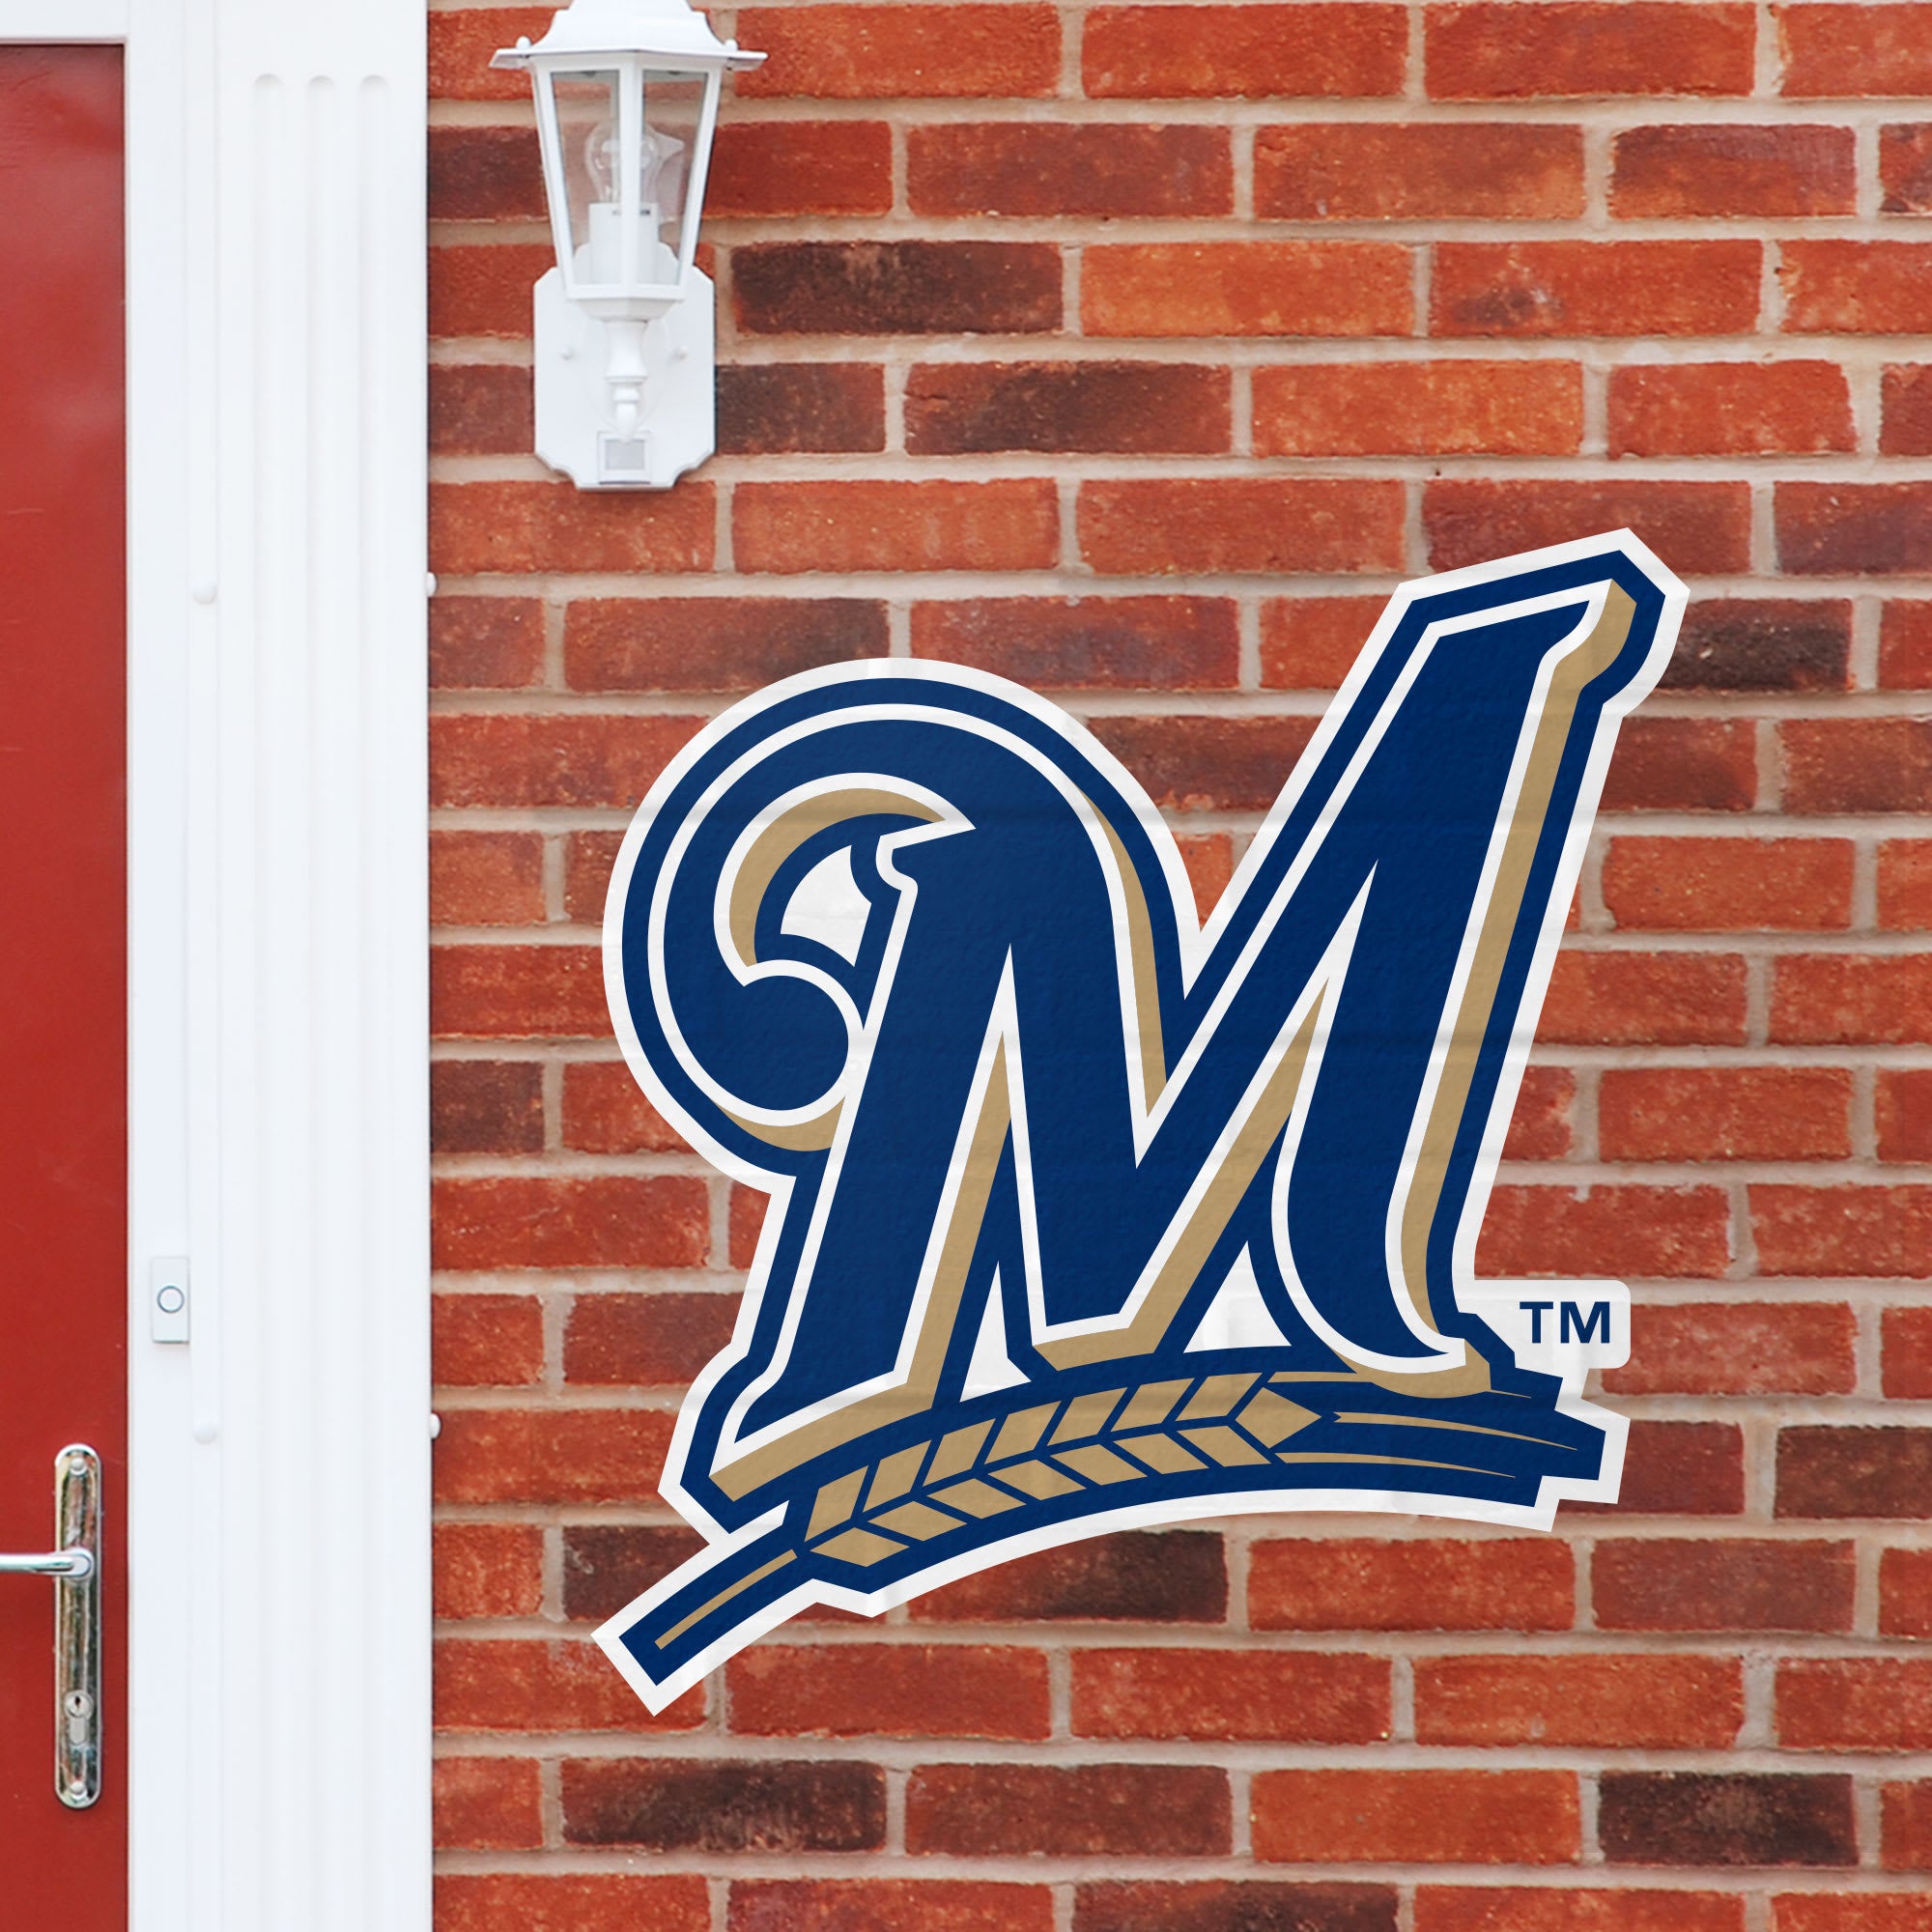 Milwaukee Brewers: Logo - Officially Licensed MLB Outdoor Graphic Giant Logo (30"W x 30"H) by Fathead | Wood/Aluminum